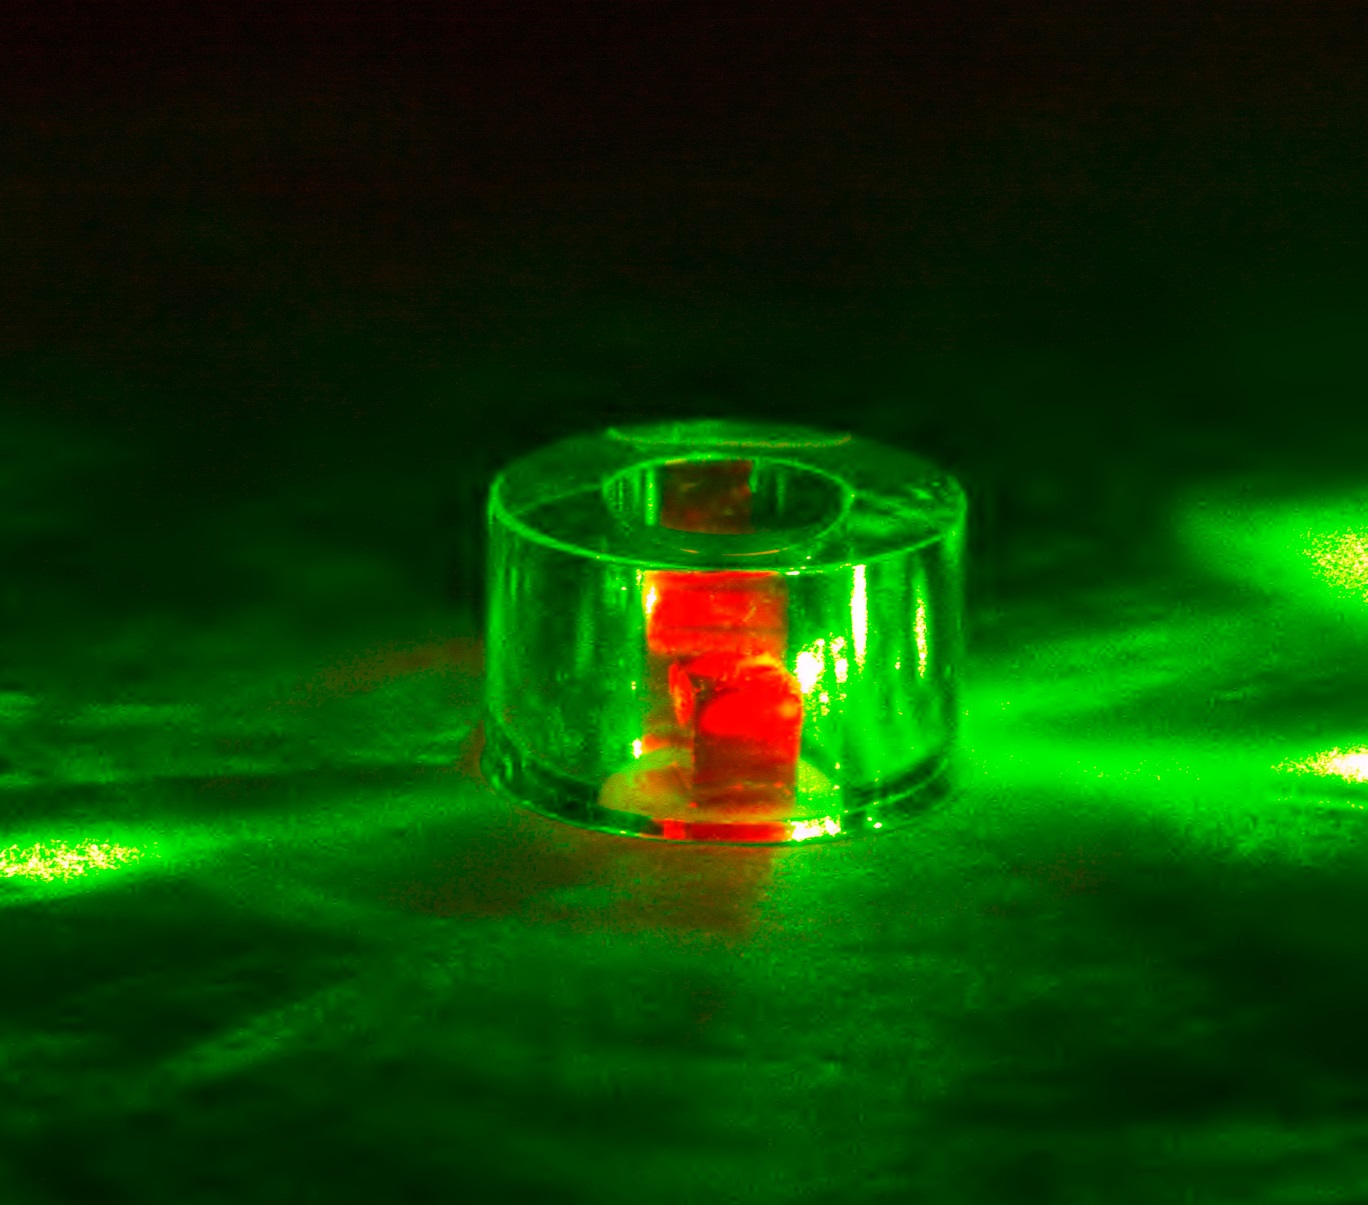 The diamond is held inside a sapphire ring and illuminated by 532-nm green laser